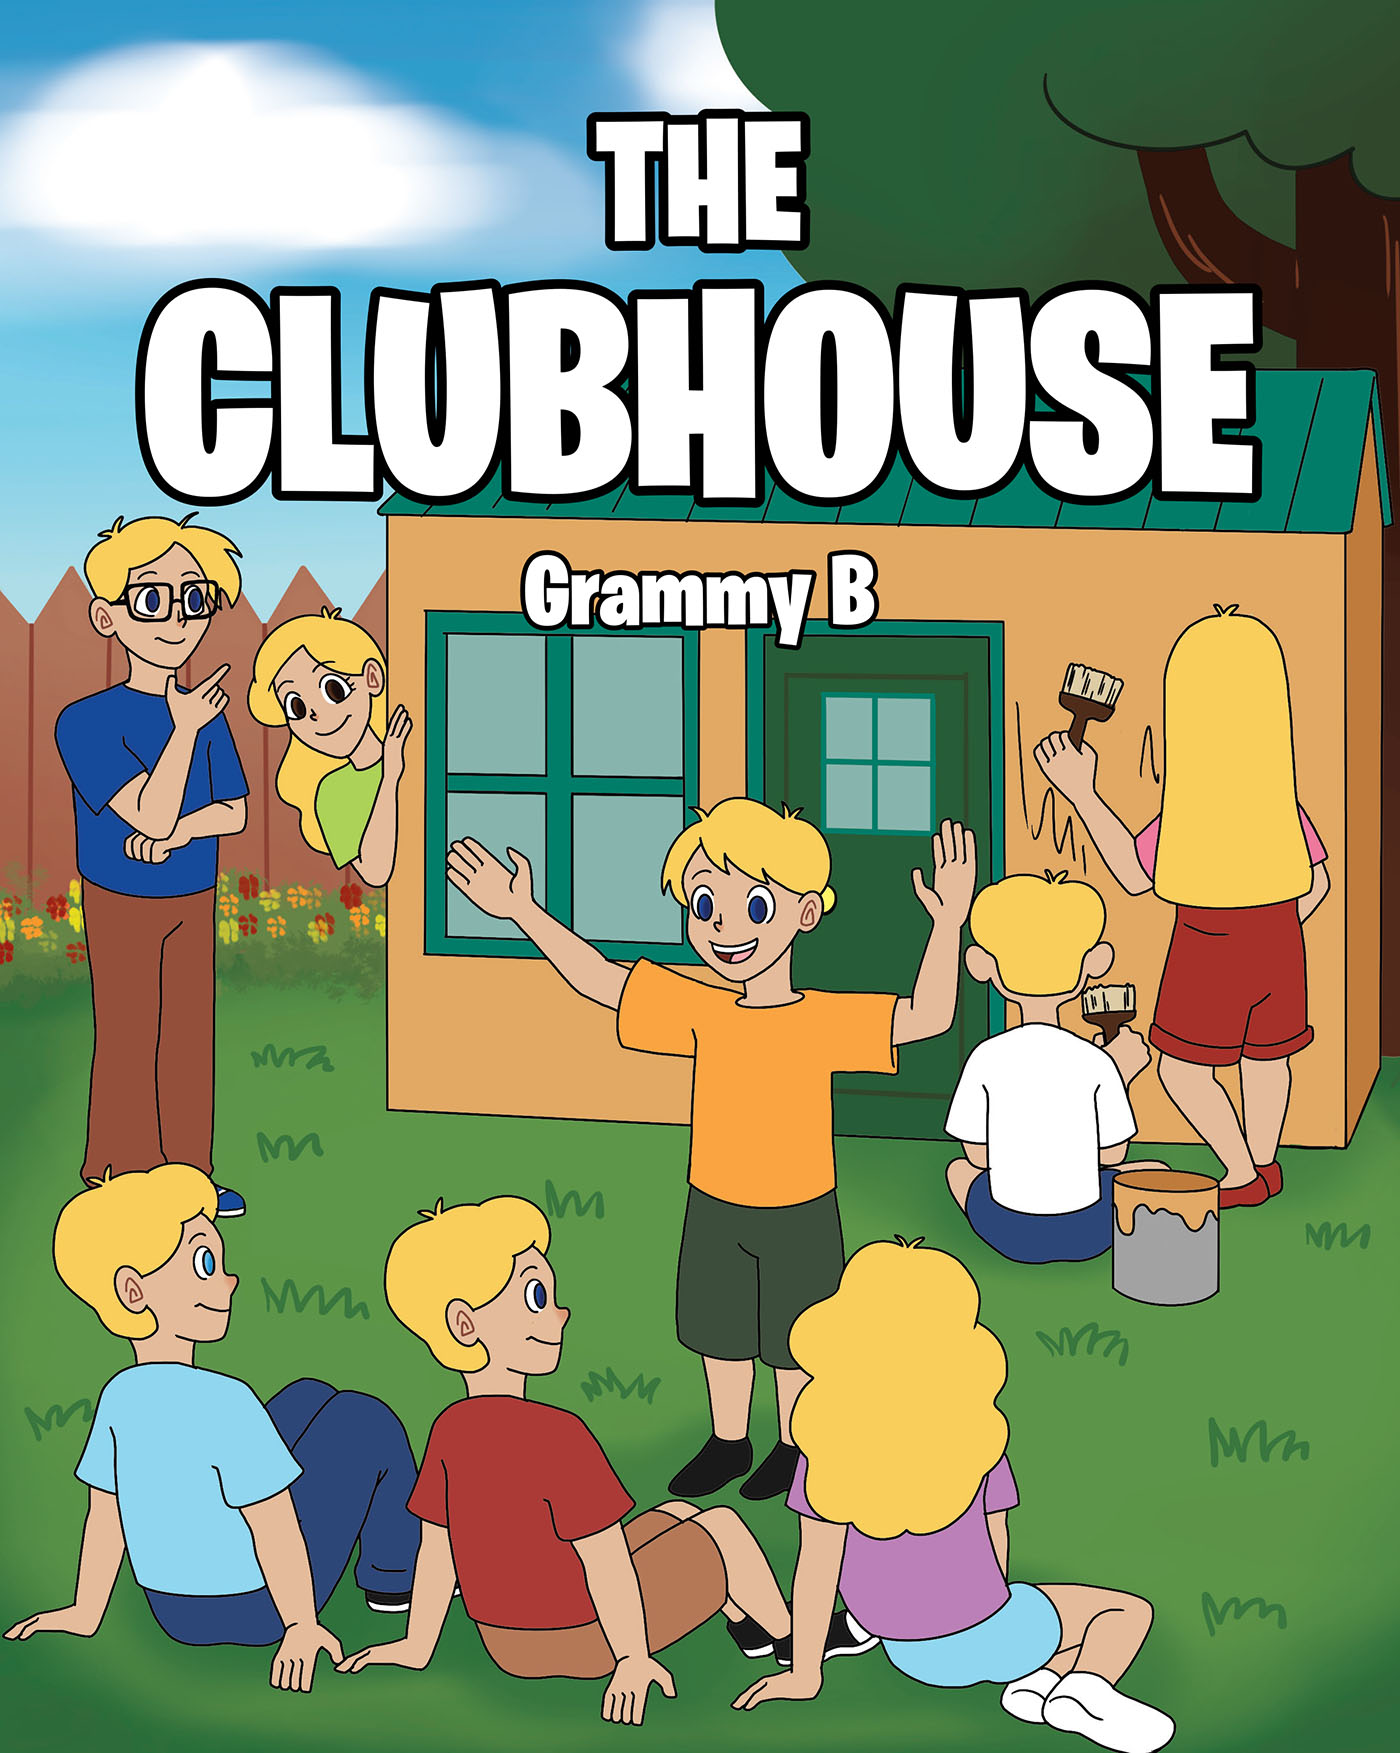 Grammy B’s Newly Released "The Clubhouse" is an Enjoyable Juvenile Fiction That Encourages Community Involvement.